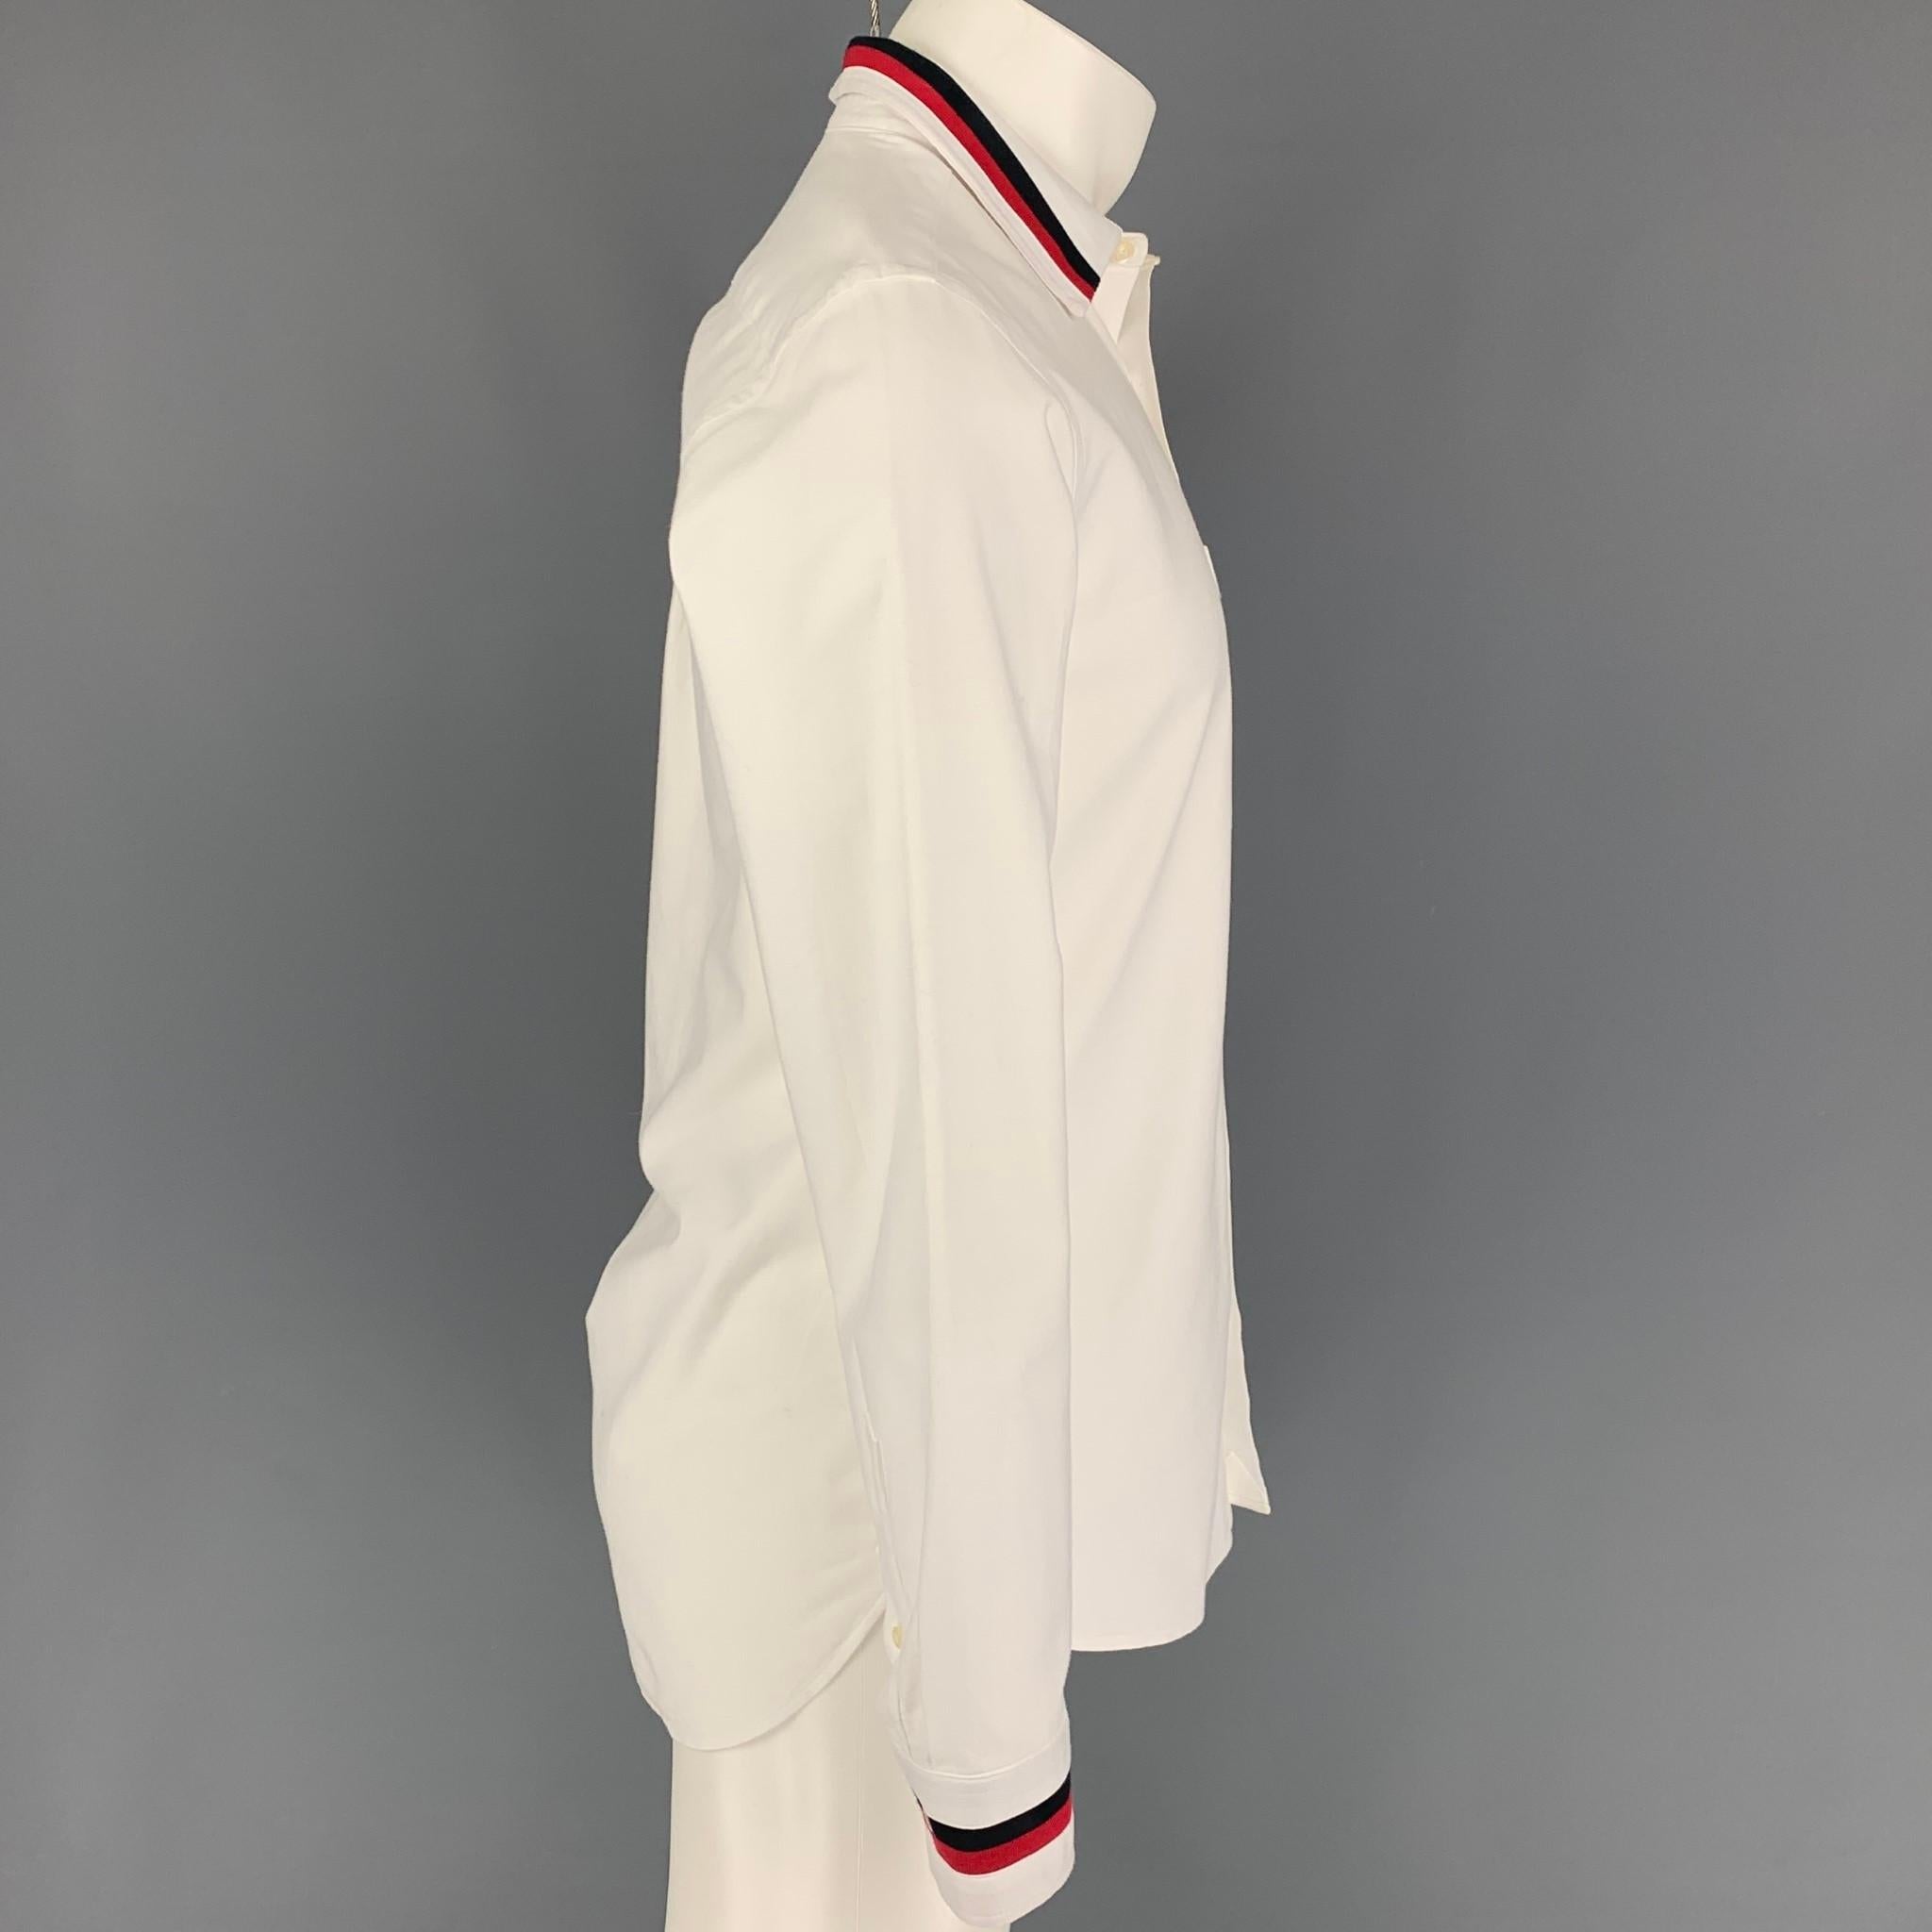 BURBERRY long sleeve shirt comes in a white cotton featuring a stripe trim, spread collar, patch pocket, and a button up closure. 

Good Pre-Owned Condition. Minor discoloration at sleeve and collar.
Marked: S

Measurements:

Shoulder: 17.5